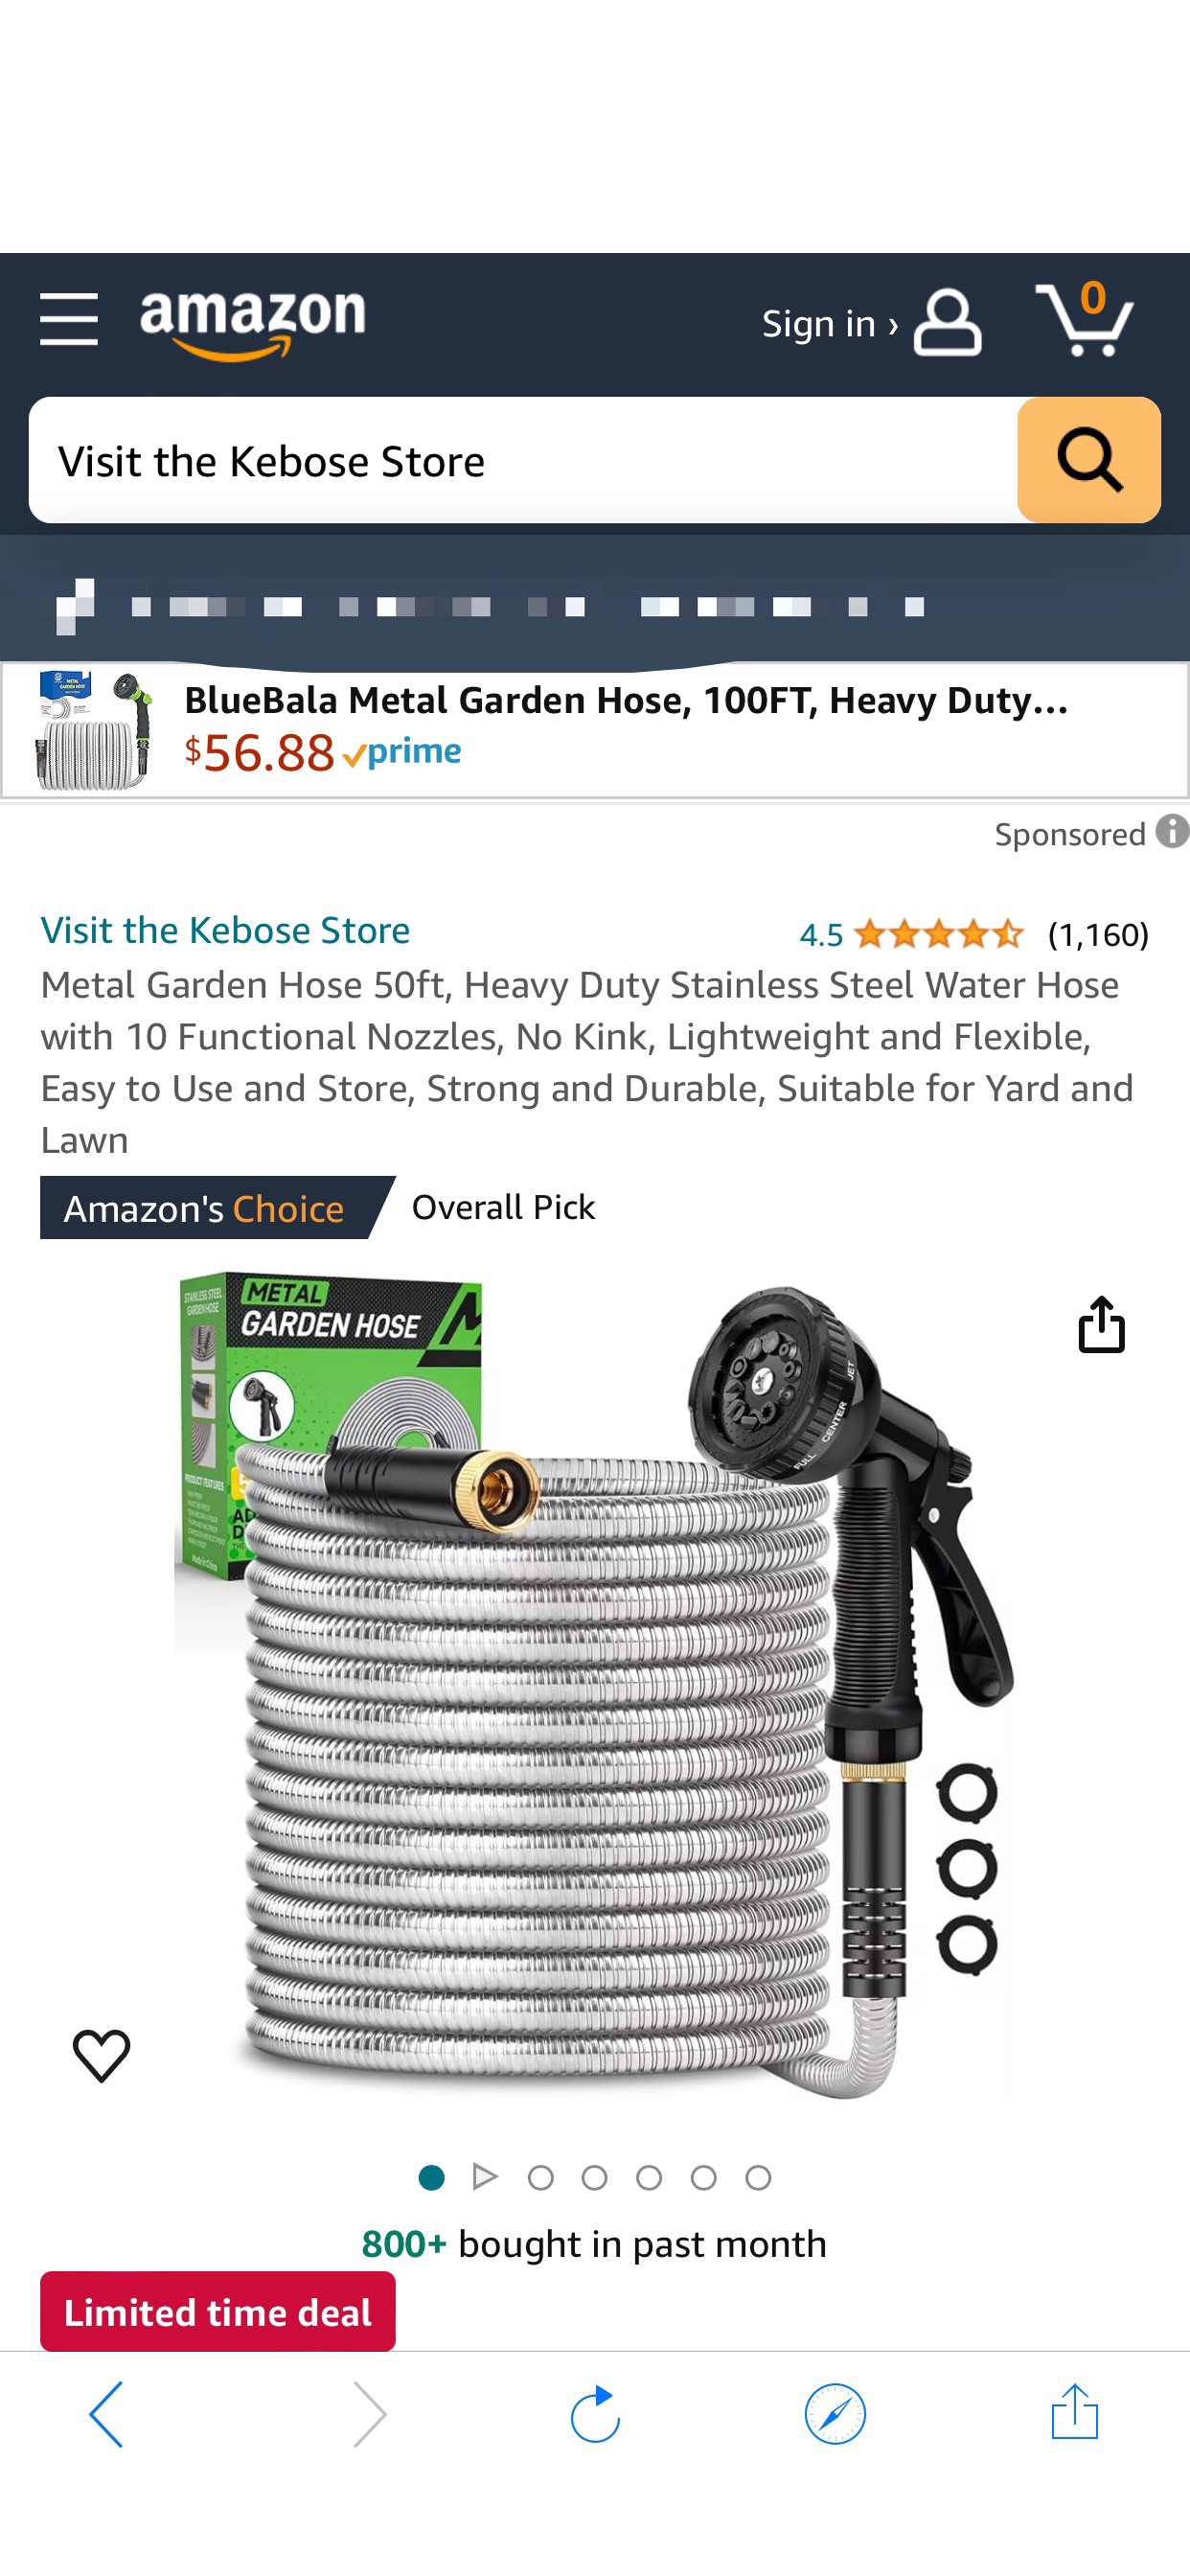 Amazon.com : Metal Garden Hose 50ft, Heavy Duty Stainless Steel Water Hose with 10 Functional Nozzles, No Kink, Lightweight and Flexible, Easy to Use and Store, Strong and Durable, Suitable for Yard a